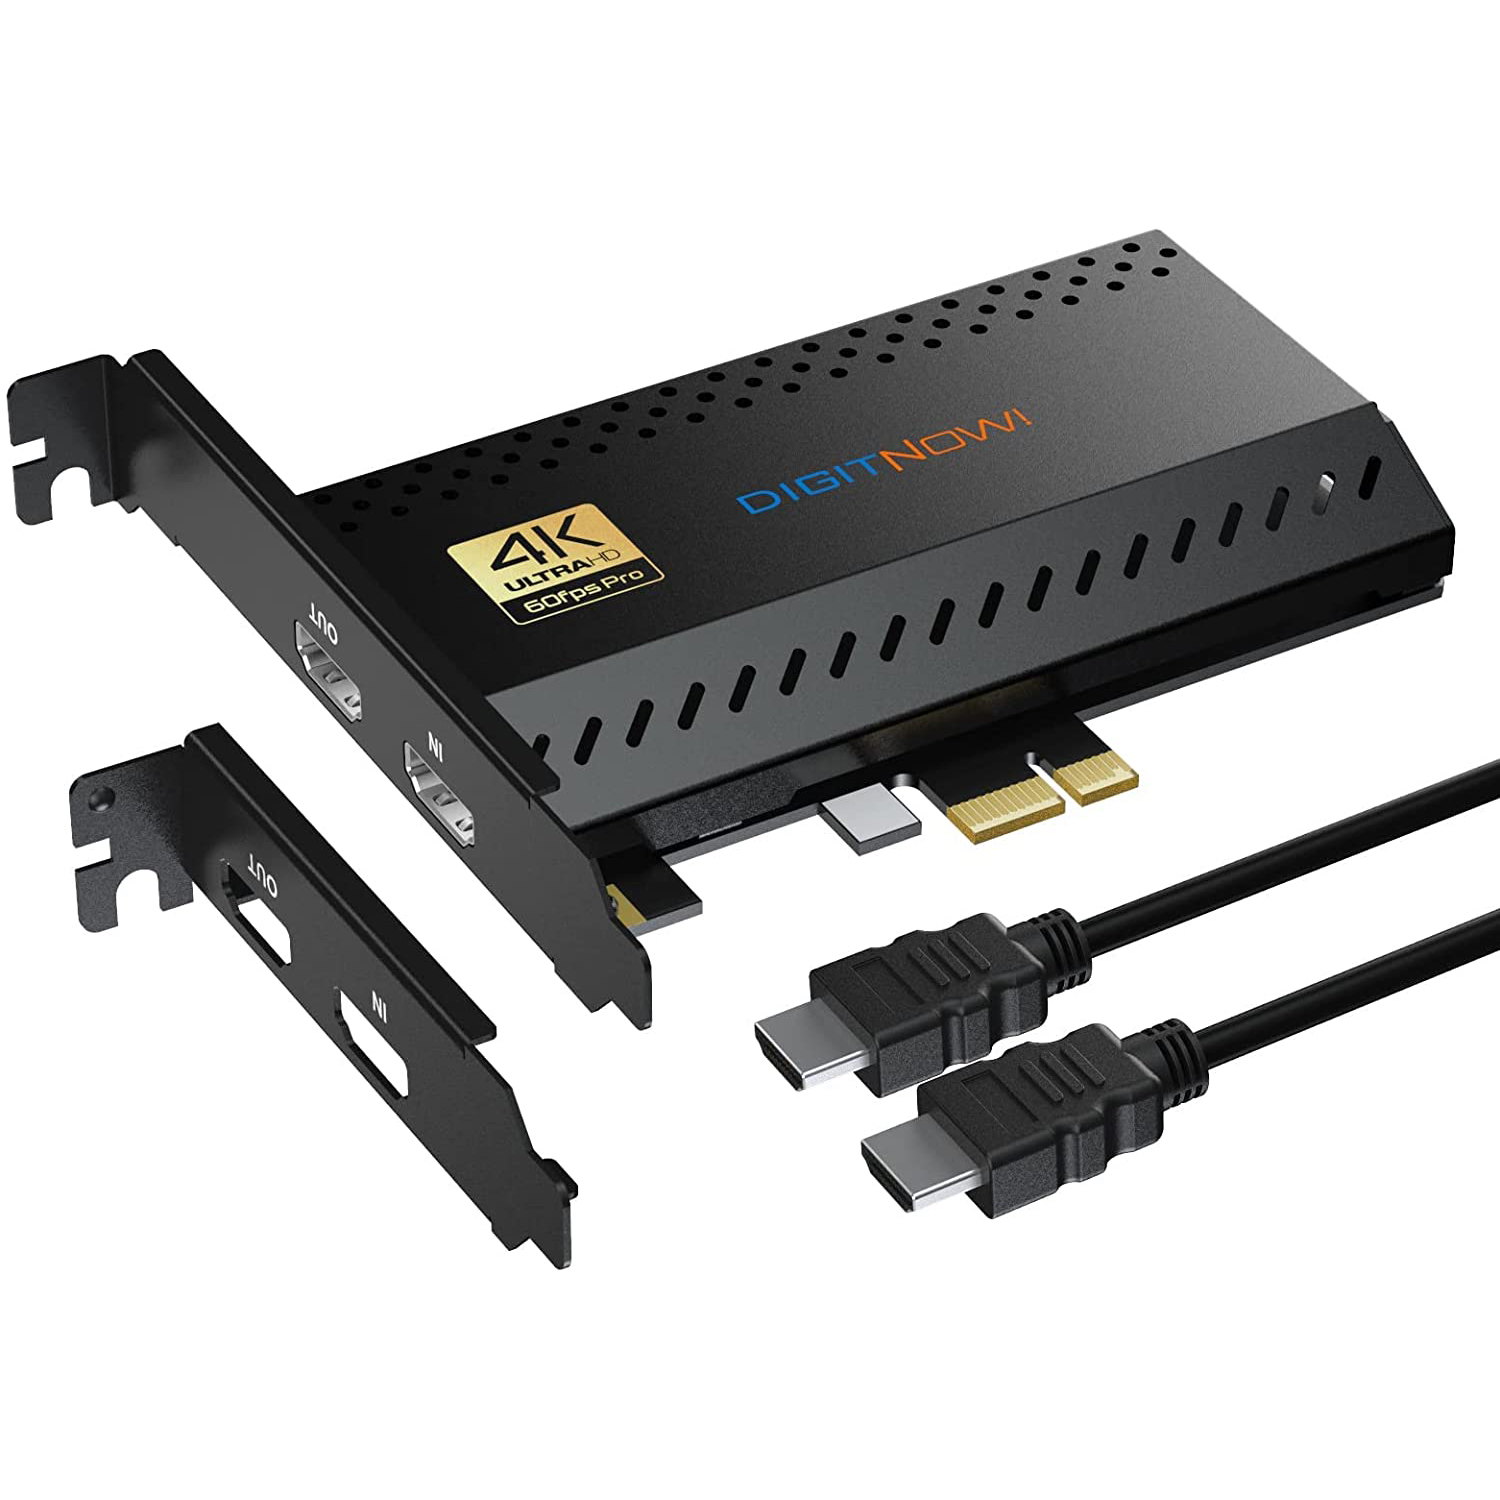 DIGITNOW PCIe Capture Card 4Kp60 - Live Gamer 4K Video Capture Card with HDMI Input/Output, Ultra-Low Latency for Streaming and Recording Nintendo Switch, PS5, PS4, Xbox Series X/S, Xbox One X